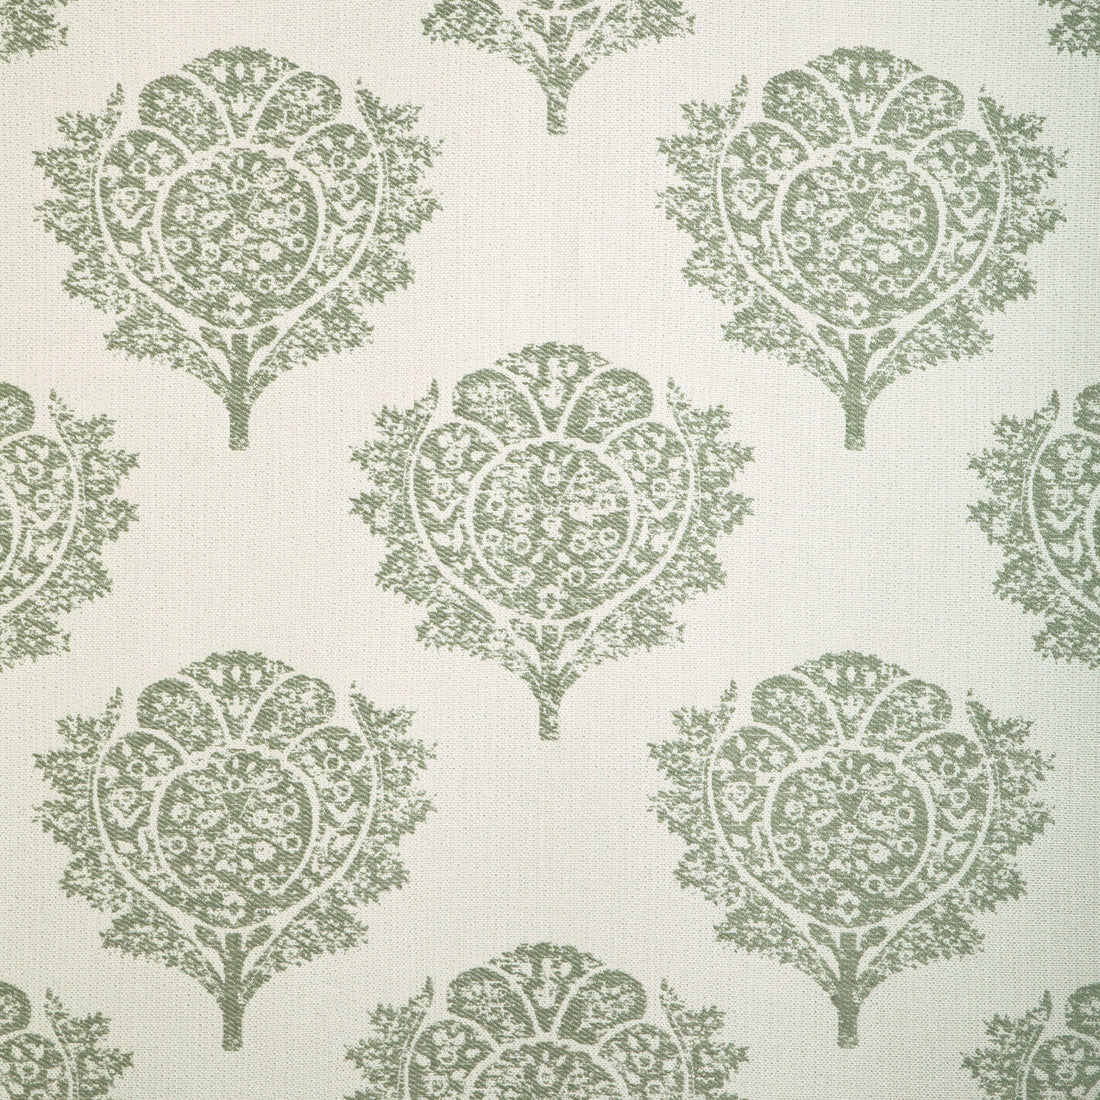 Heirlooms fabric in lichen color - pattern 36864.3.0 - by Kravet Couture in the Atelier Weaves collection